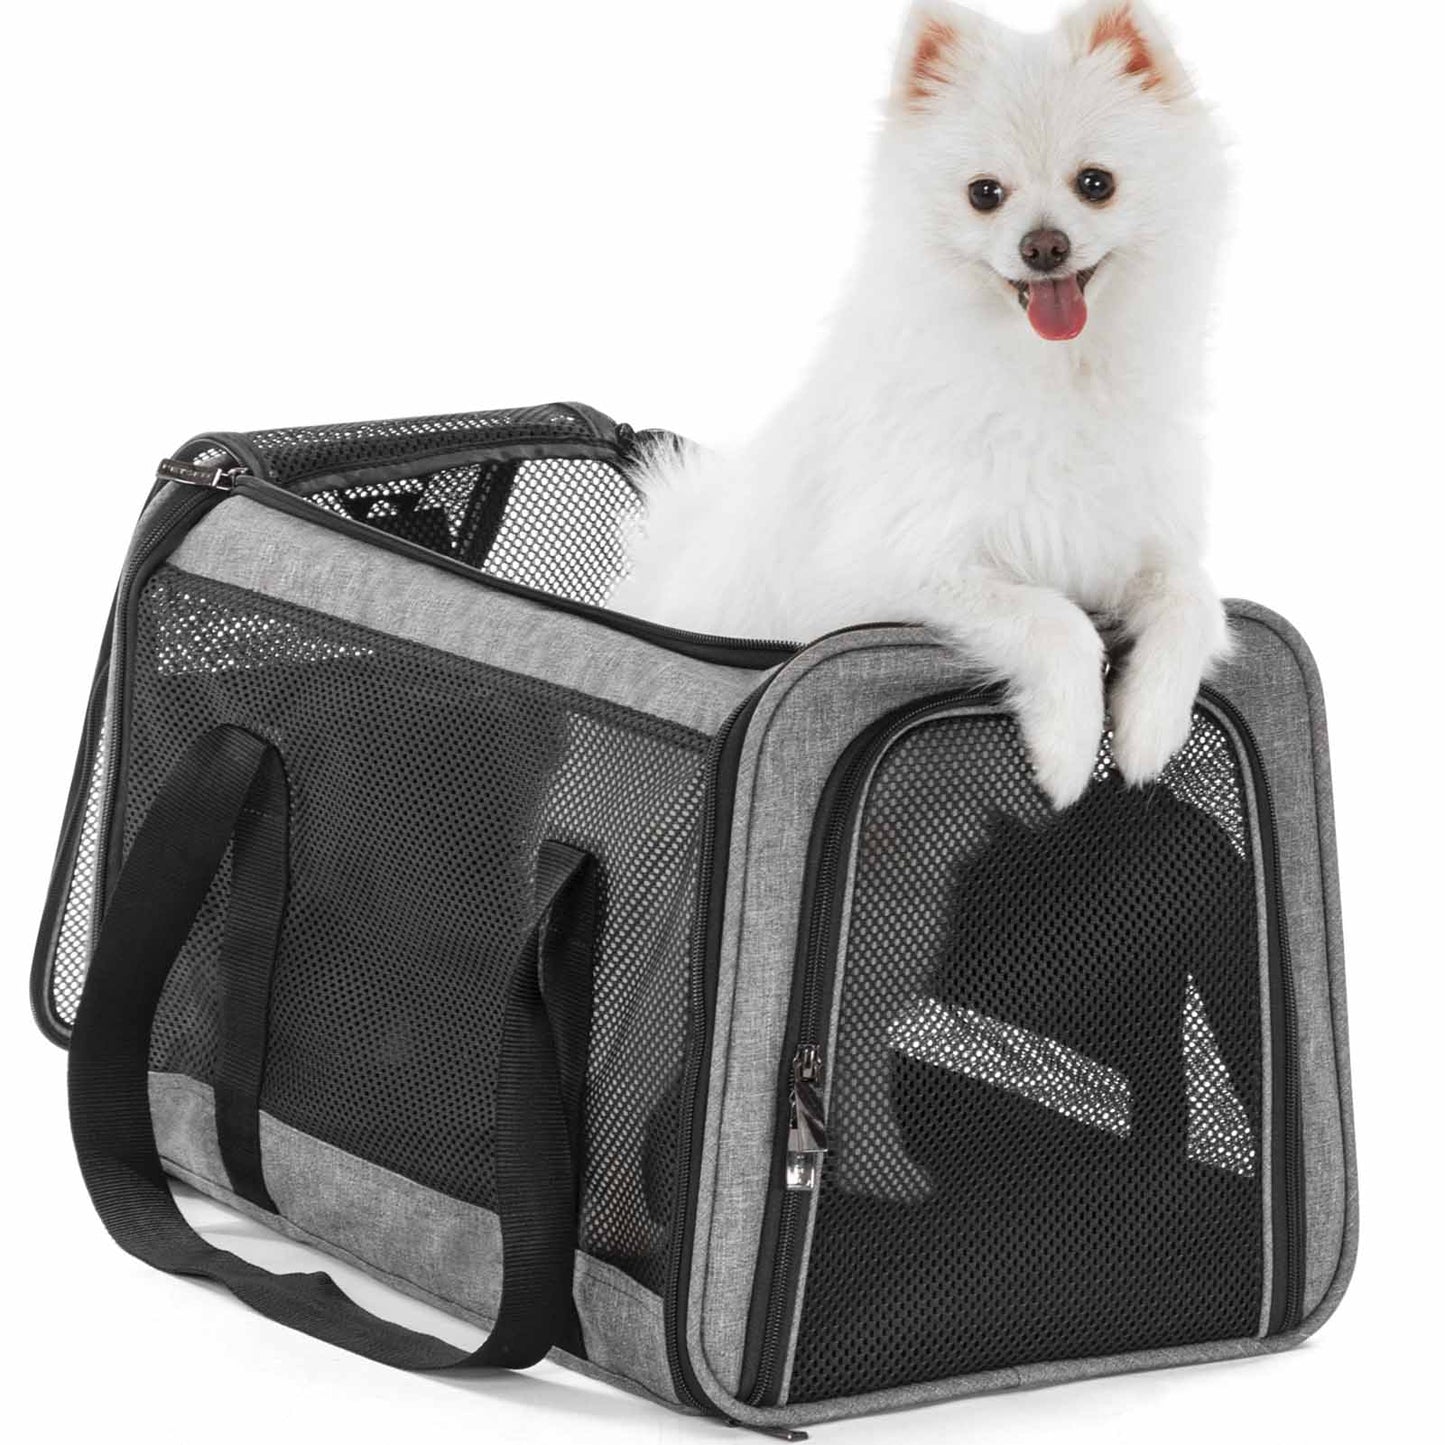 Petsfit-Large-Capacity-Lightweight-Washable-Soft-Sided-Pet-Travel-Carrier-10